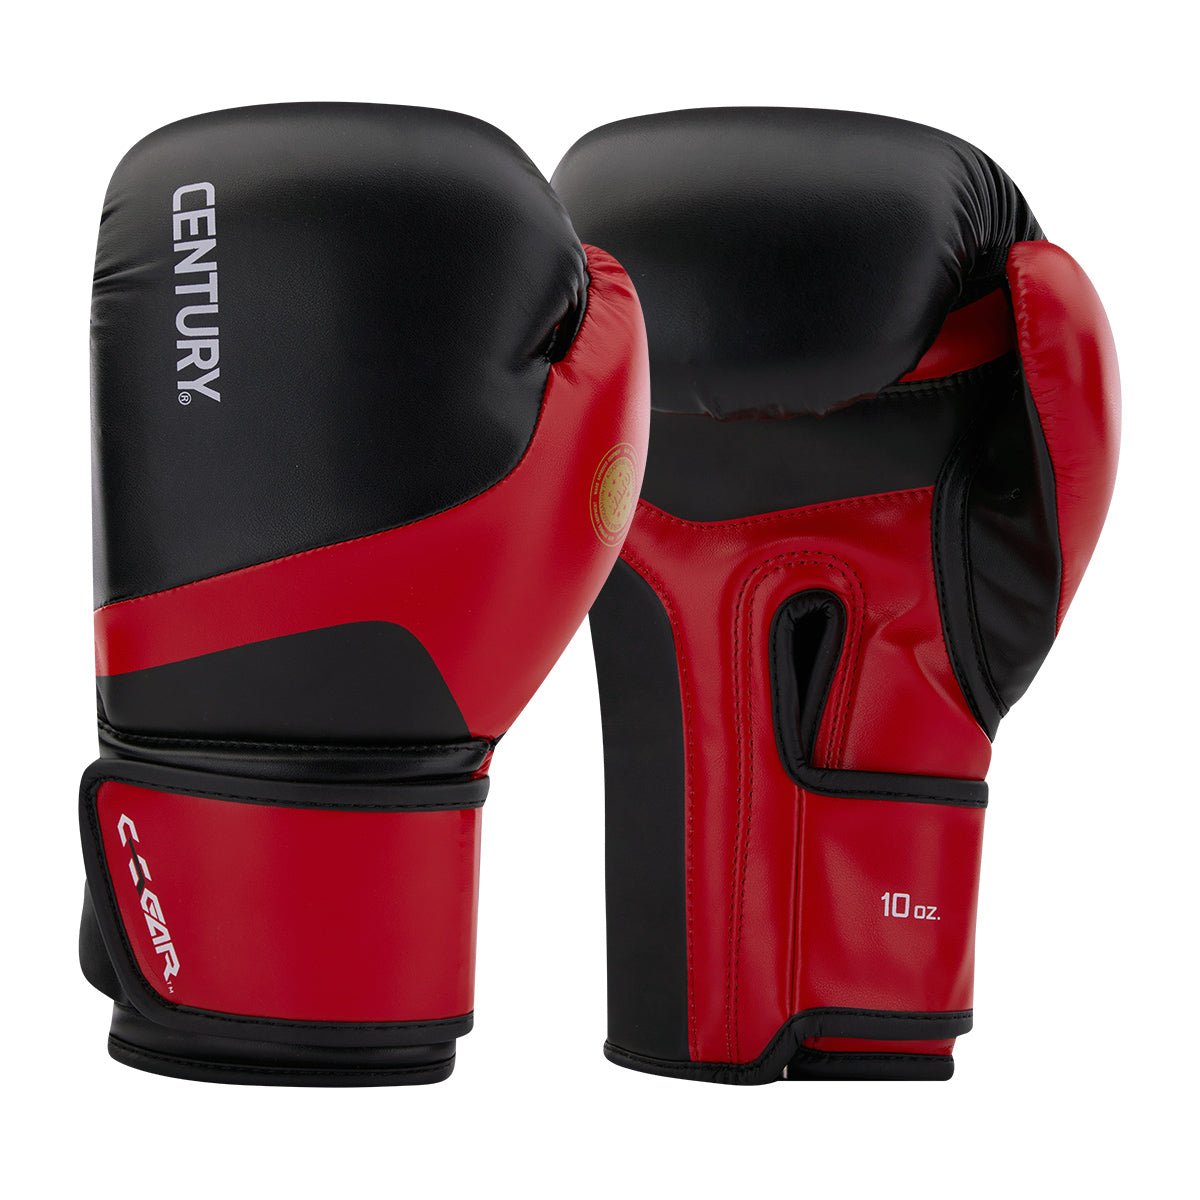 C-Gear Determination Kickboxing Punches 10 oz. Black Red